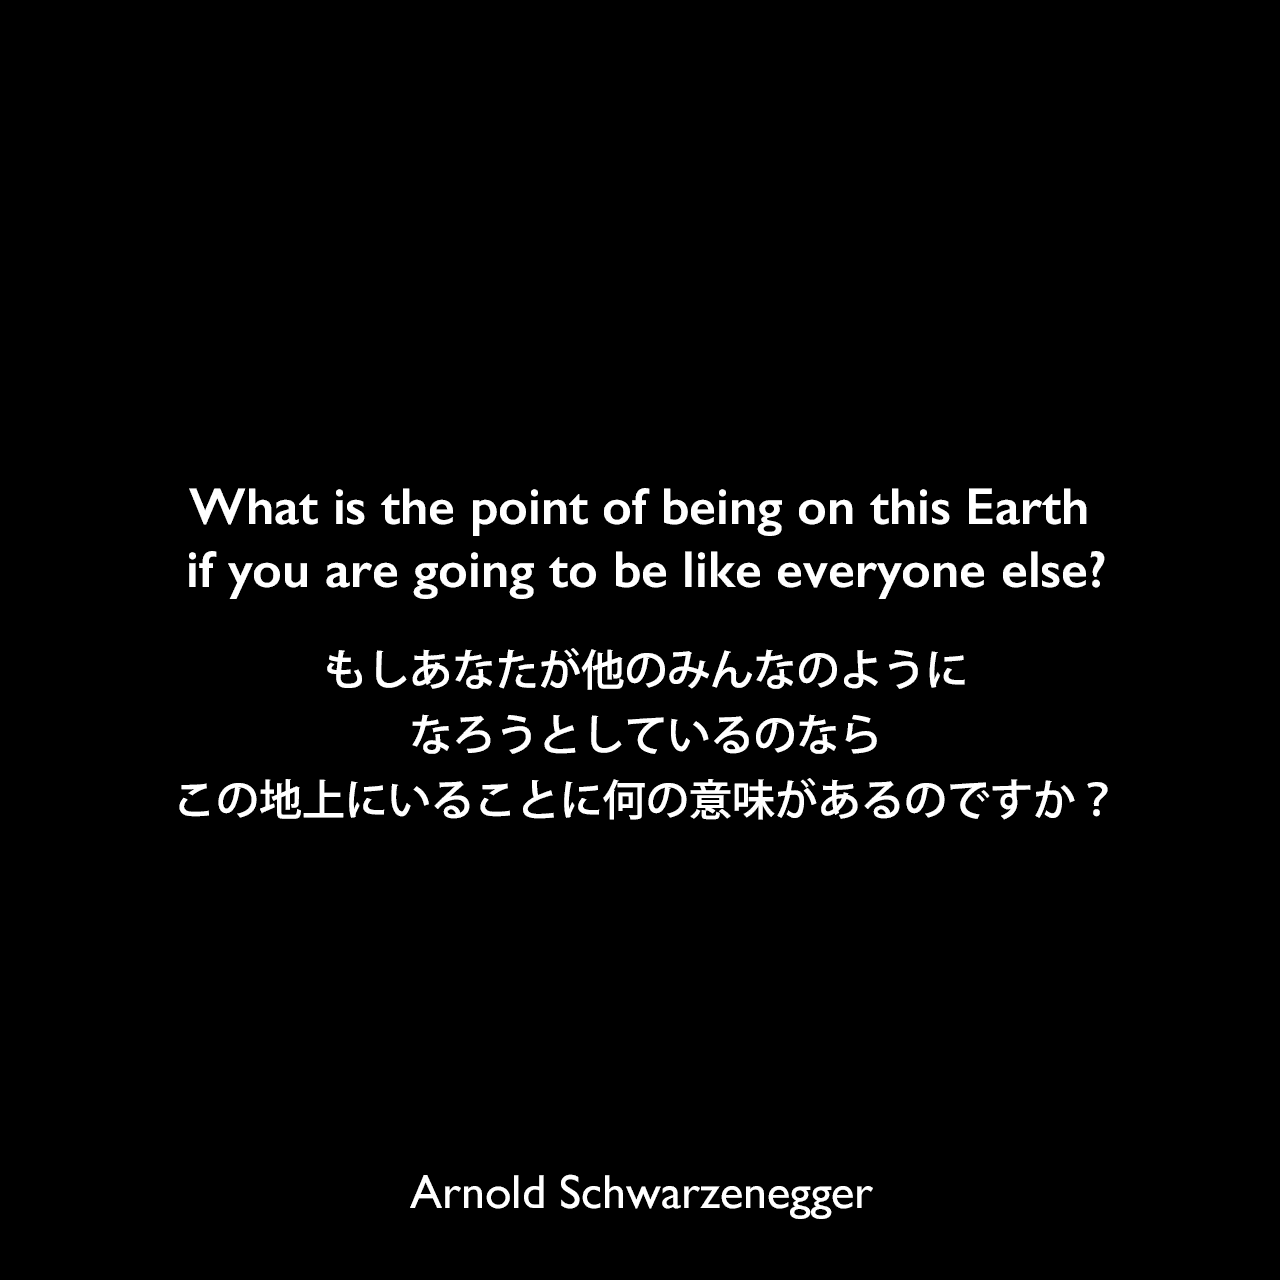 What is the point of being on this Earth if you are going to be like everyone else?もしあなたが他のみんなのようになろうとしているのなら、この地上にいることに何の意味があるのですか？Arnold Schwarzenegger